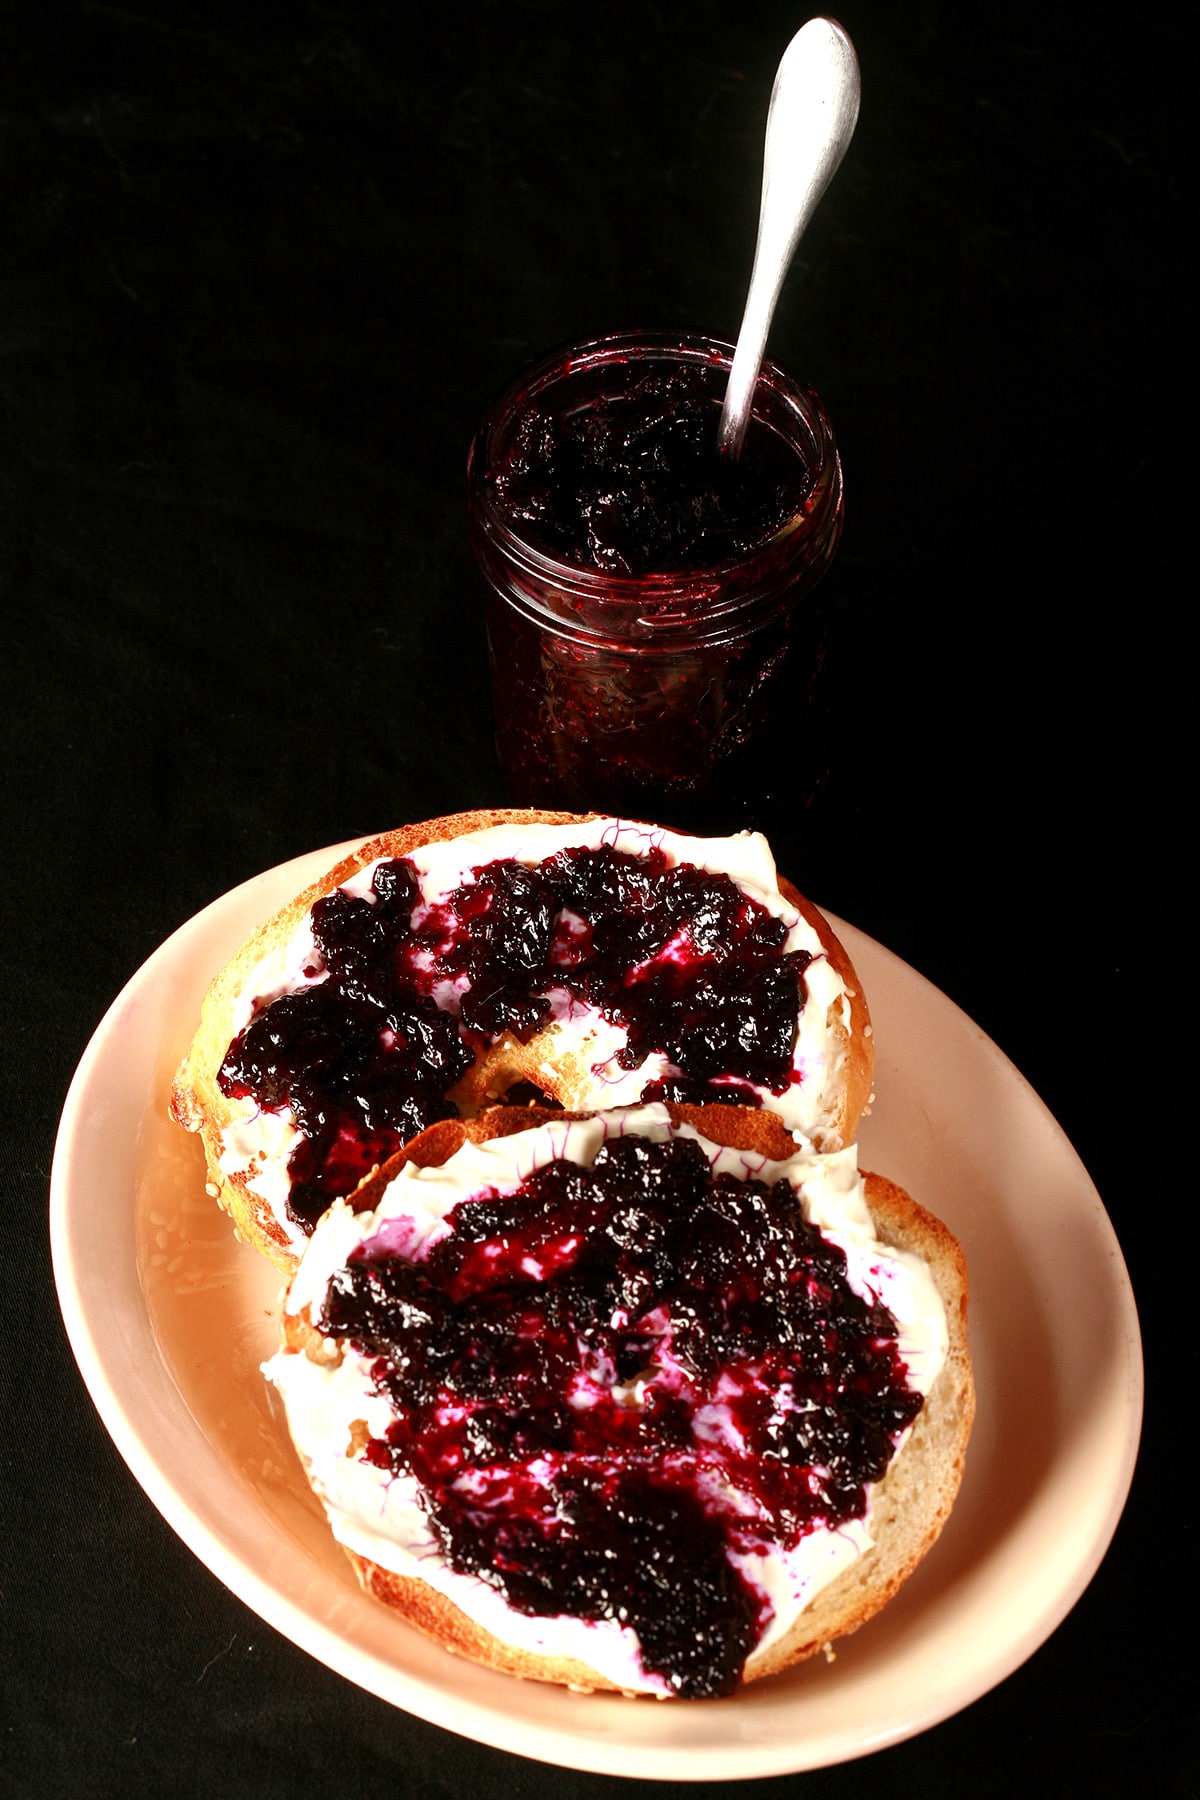 A bagel spread with cream cheese and topped with this small batch blueberry jam. There is a small jar of jam next to it.